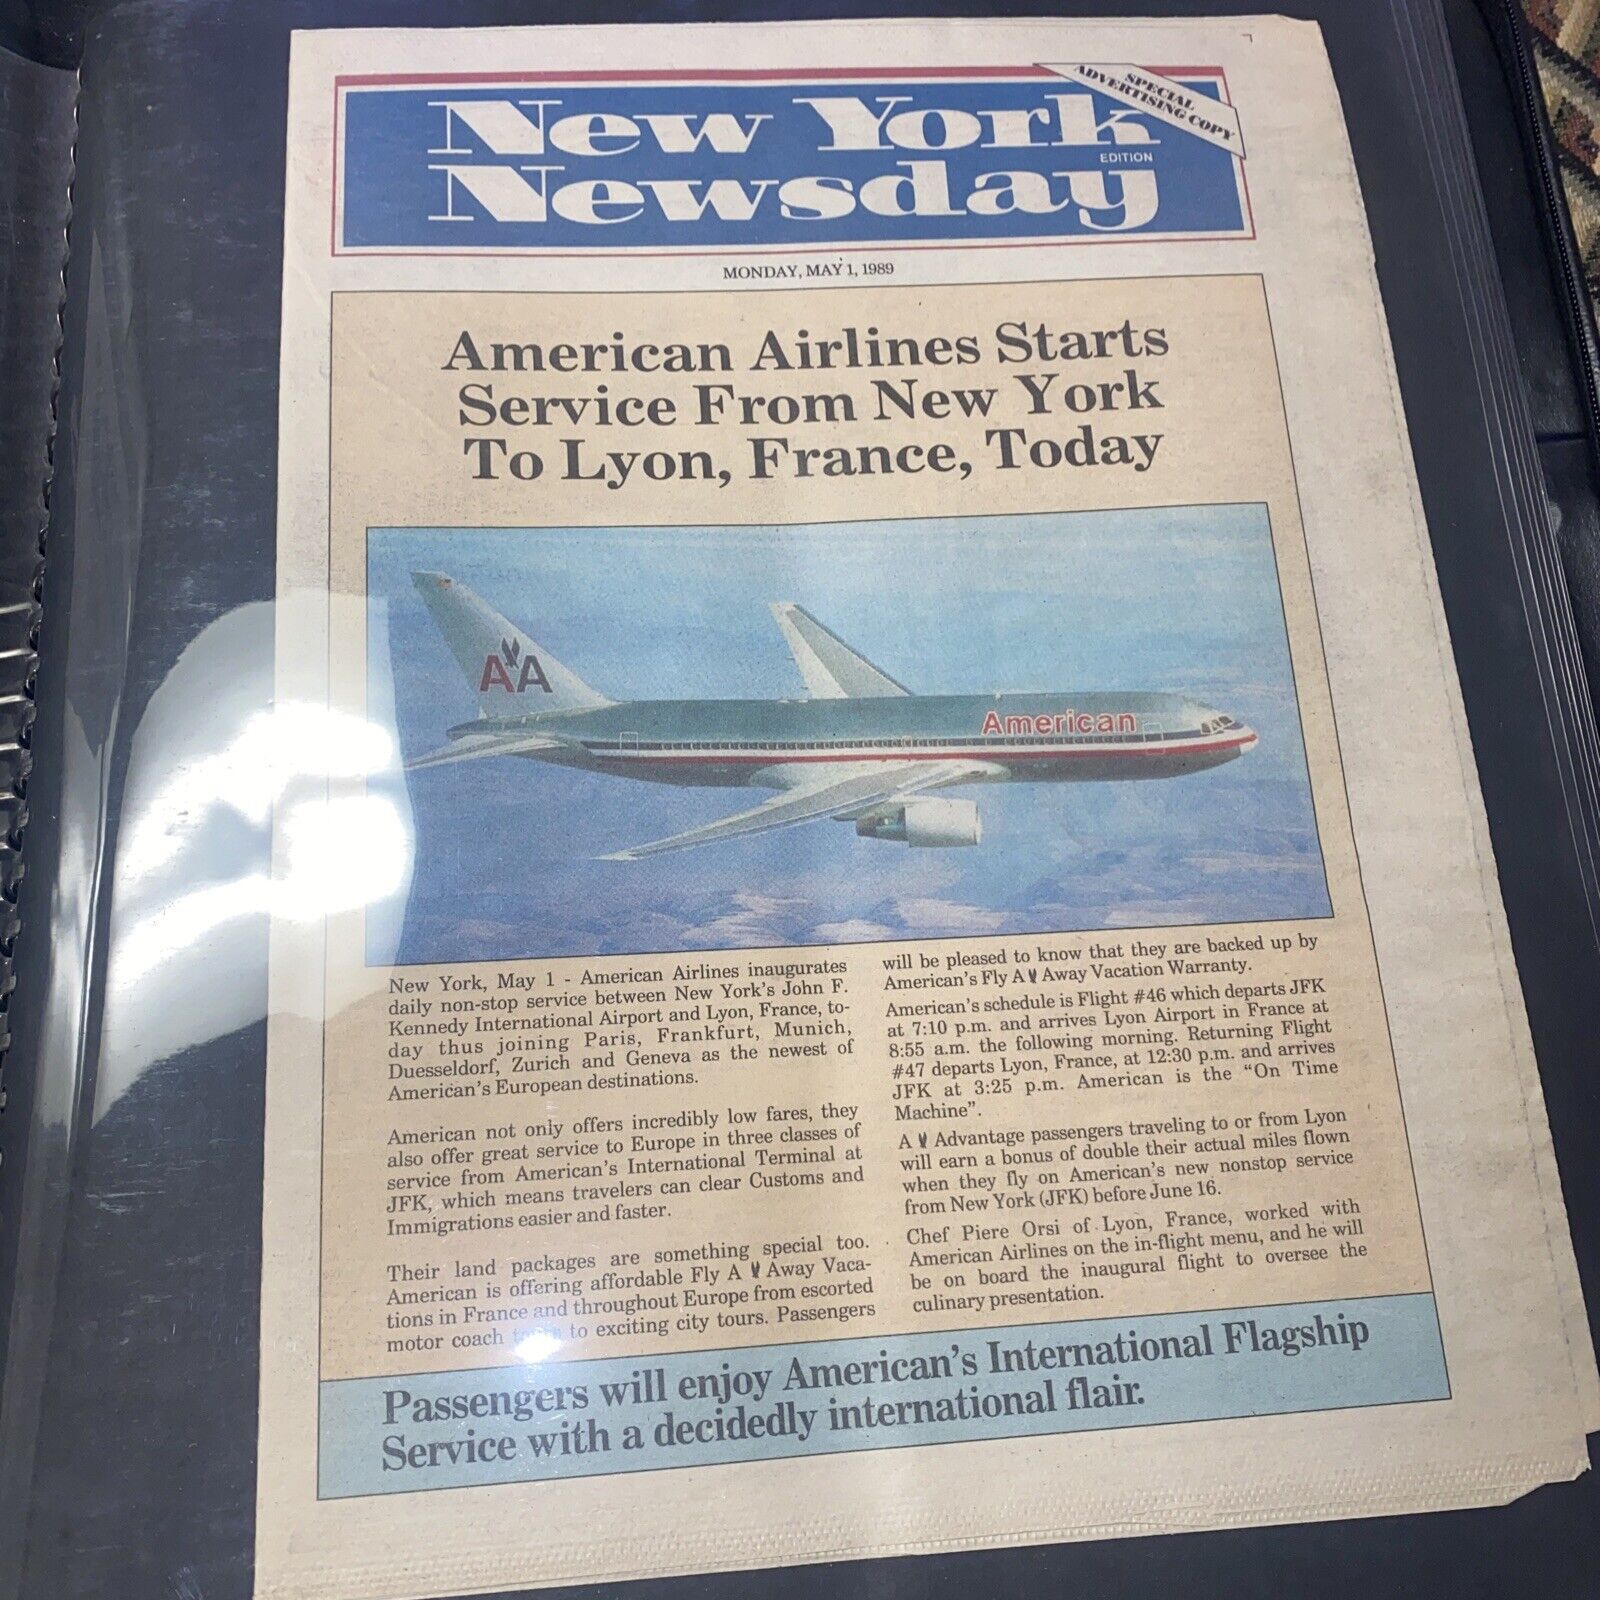 Newsday Front page May 1, 1989 American Airlines Starts Service from New York